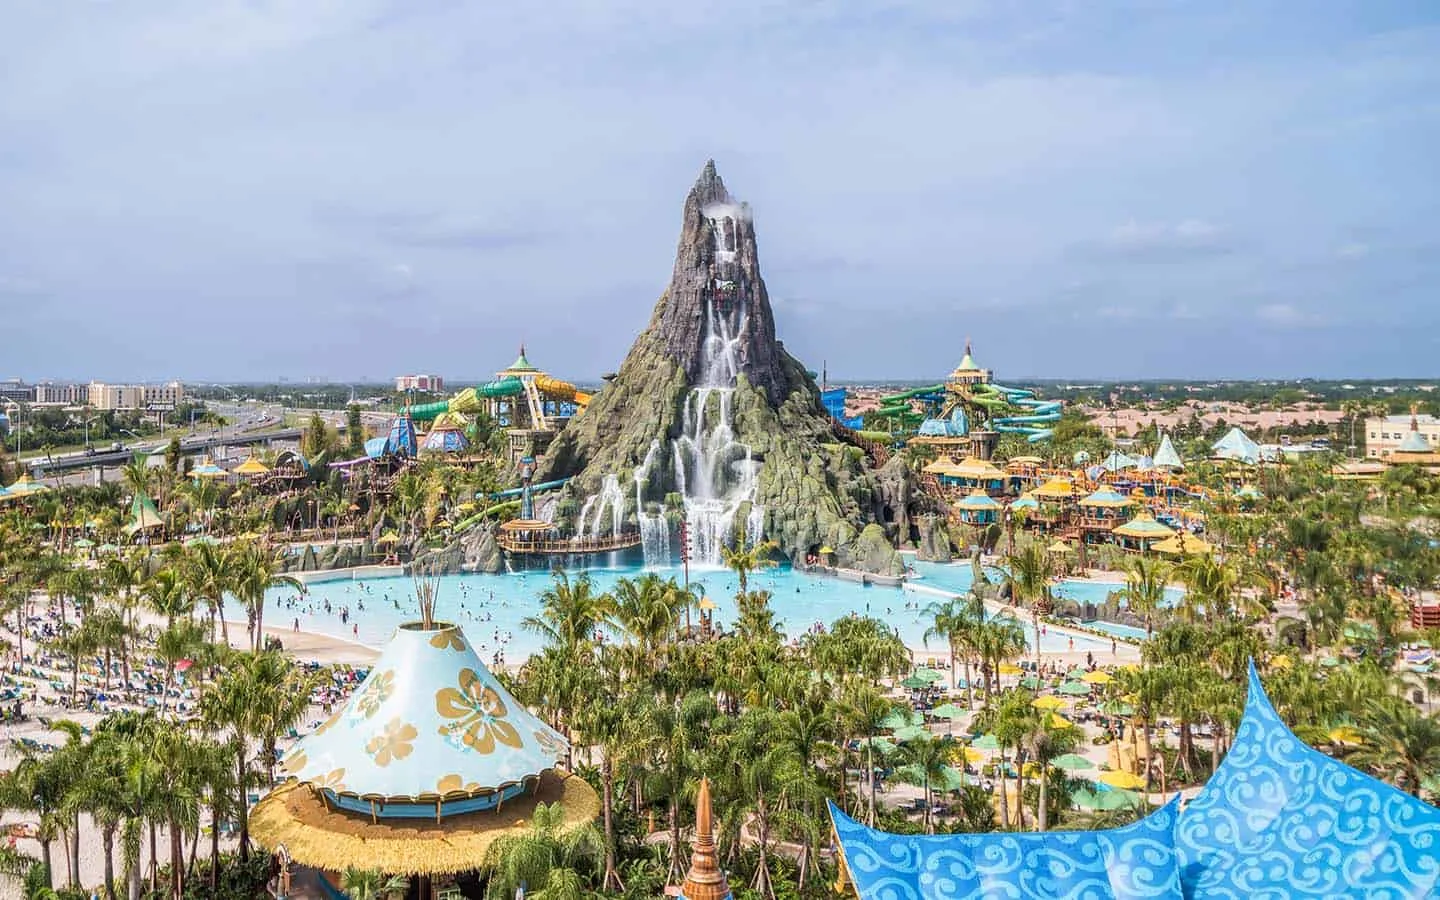 Volcano Bay Attractions (with comparisons to Disney World)